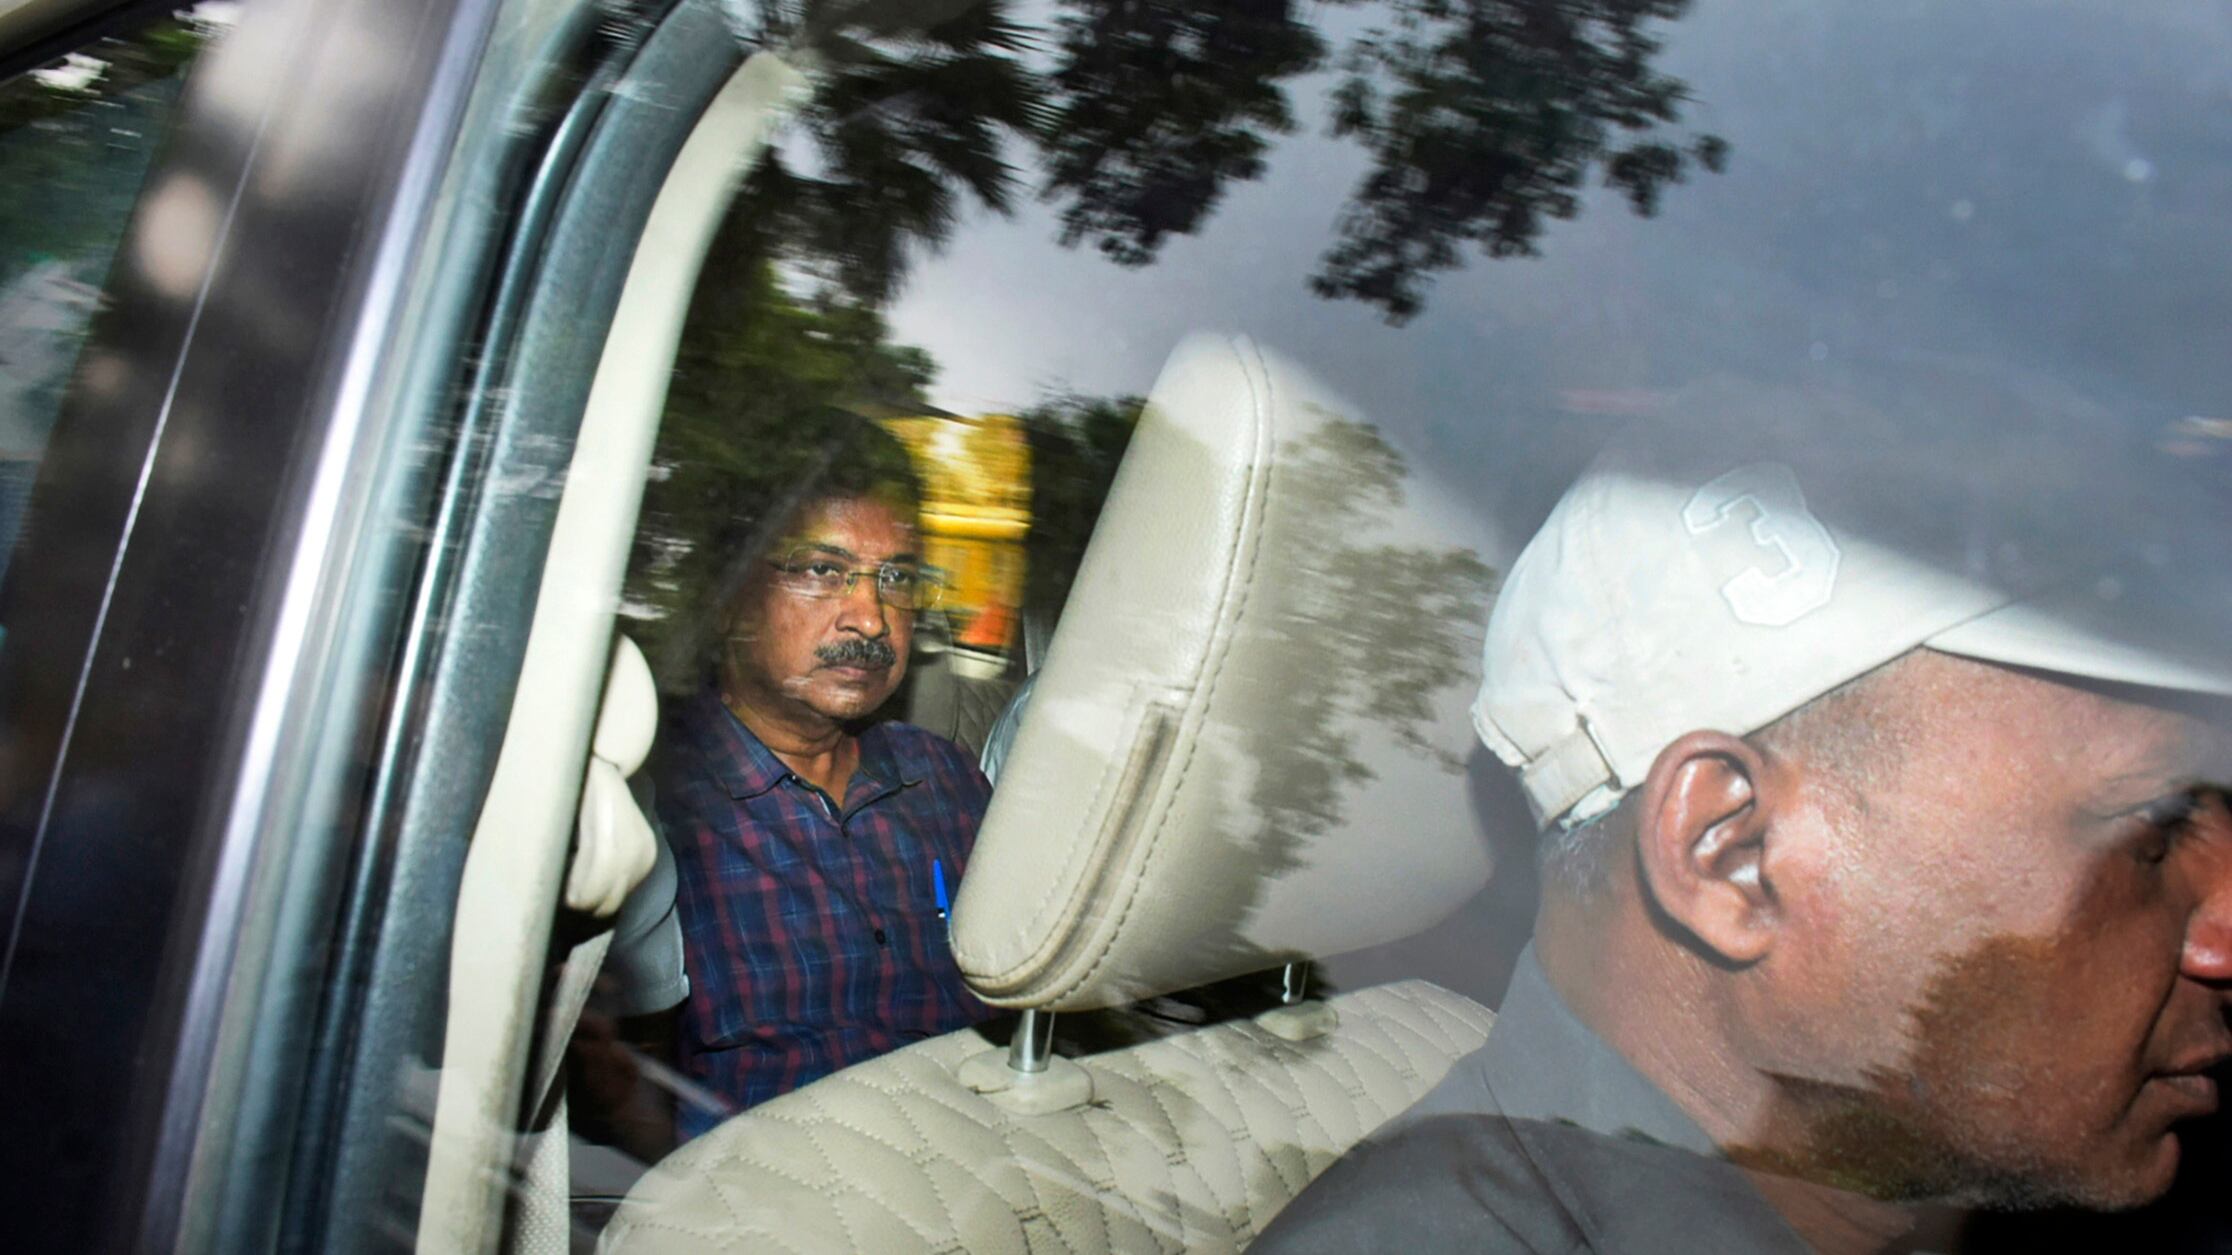 Indian opposition leader Arvind Kejriwal, pictured after an earlier court appearance, has been given interim bail by the Supreme Court (Dinesh Joshi/AP)